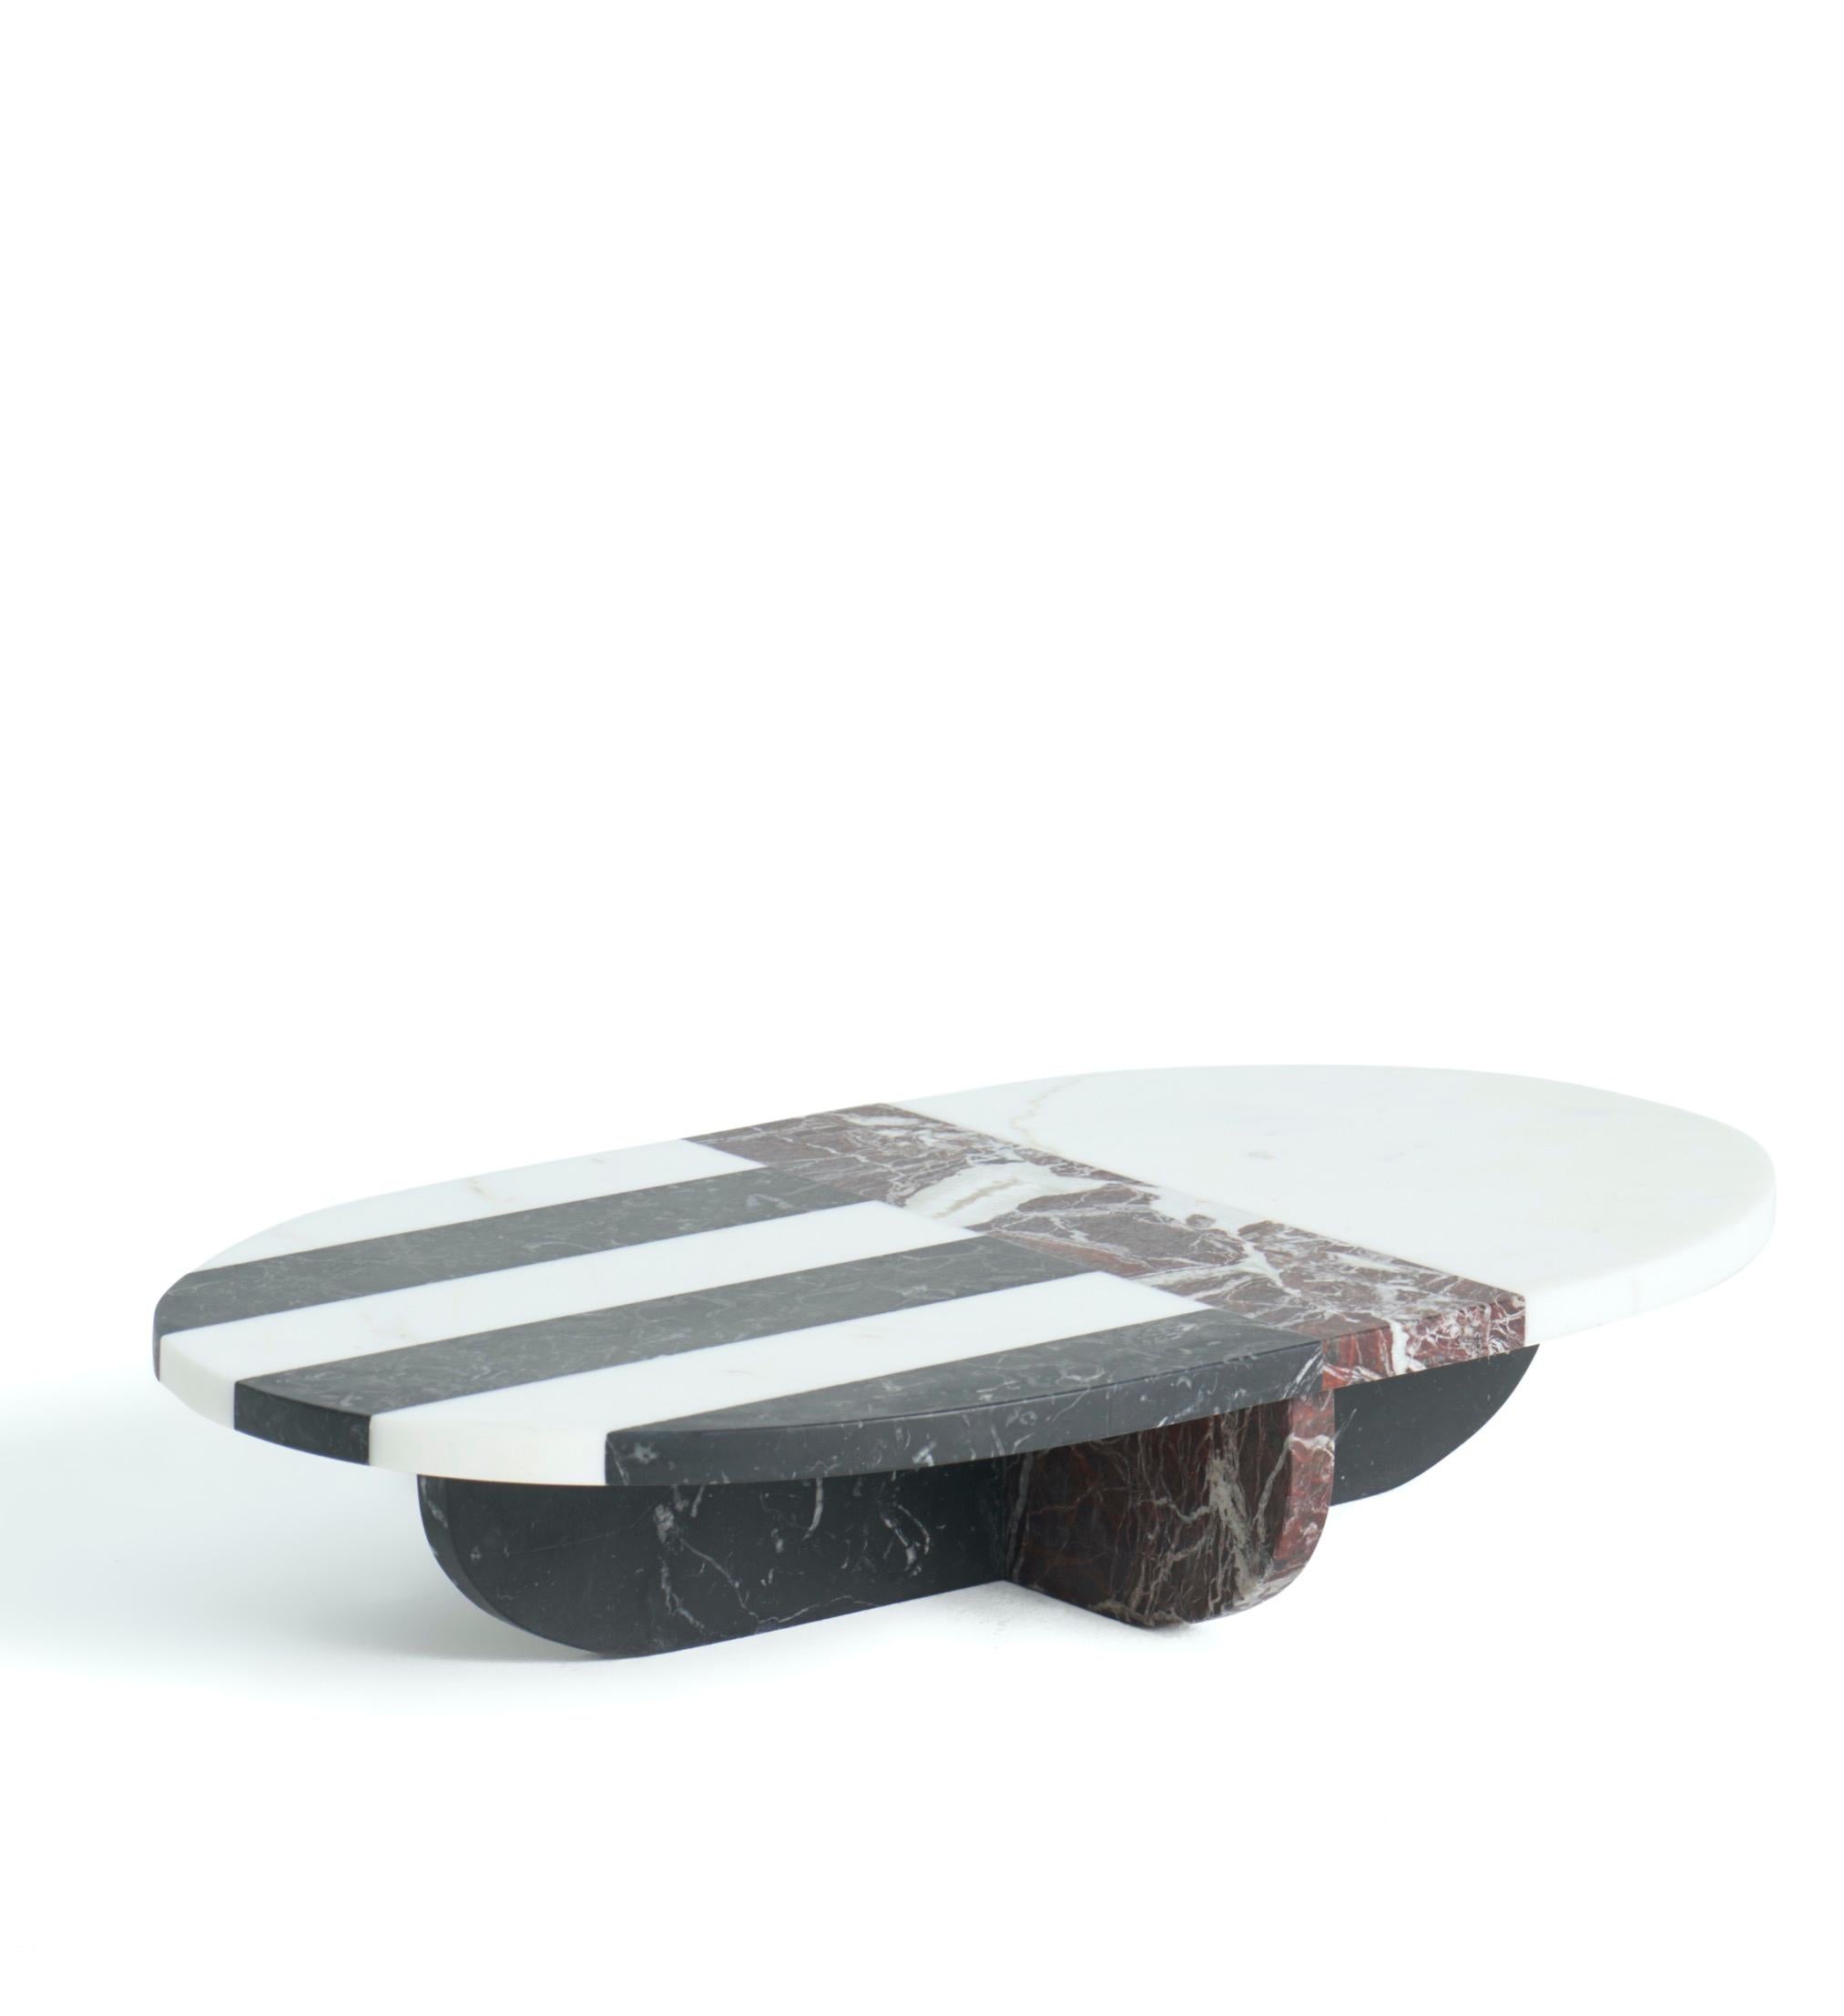 Artemisia marble centerpiece by Matteo Cibic
Dimensions: 23.6 x 13.8 x 4.7 cm
Materials:
Bianco
Michelangelo,
Rosso Levanto,
Nero Marquinia

Please note that the Cibic pieces with “ears” or tray handles are ornamental and not functional. 
Use them